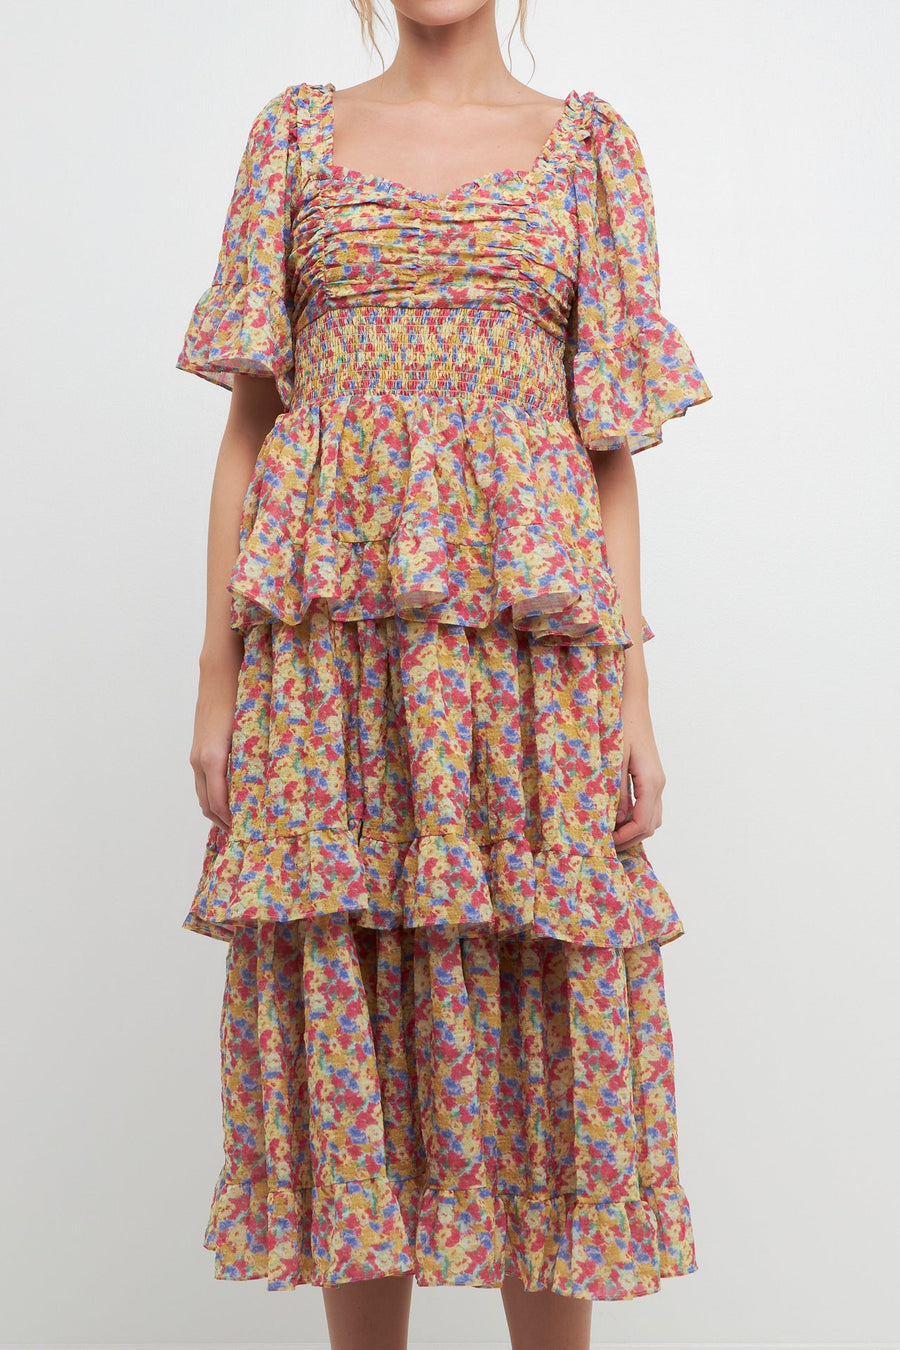 FREE THE ROSES-Floral Smocked Ruffle Tiered Maxi Dress-DRESSES available at Objectrare